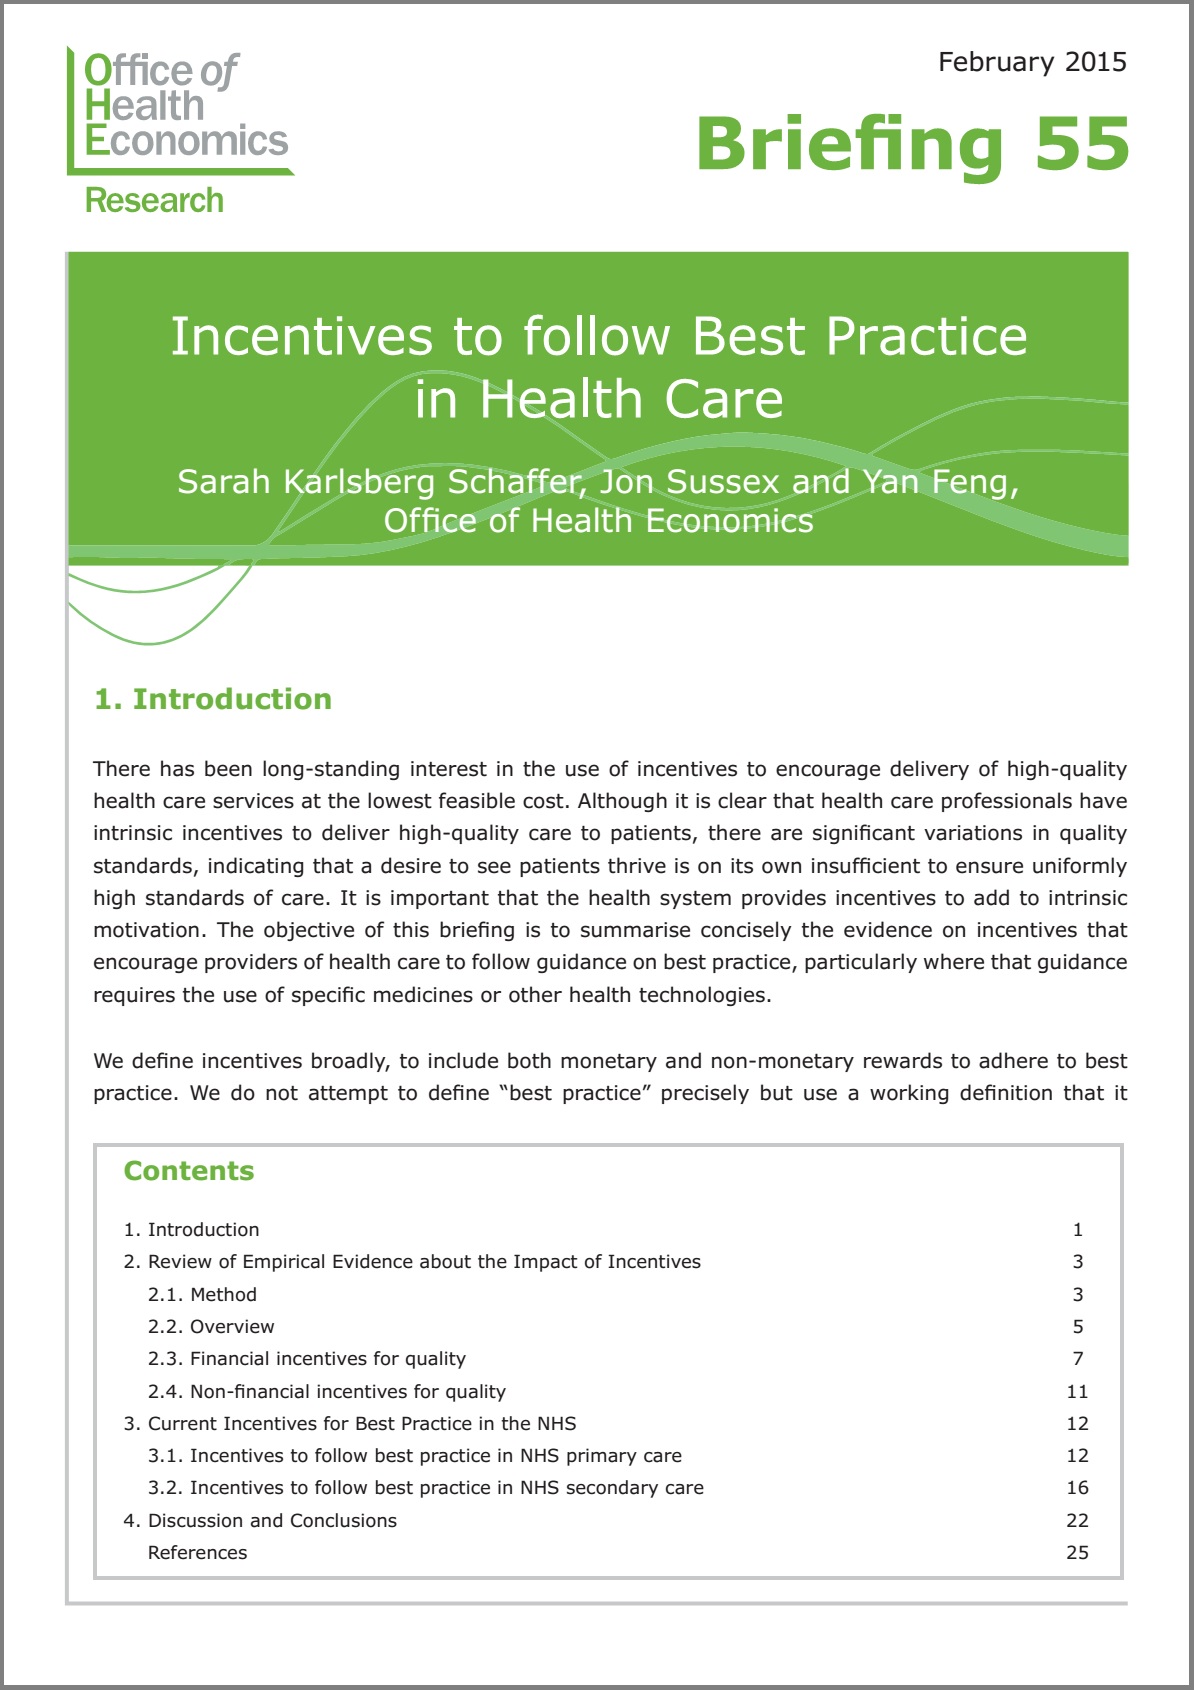 Incentives to follow Best Practice in Health Care